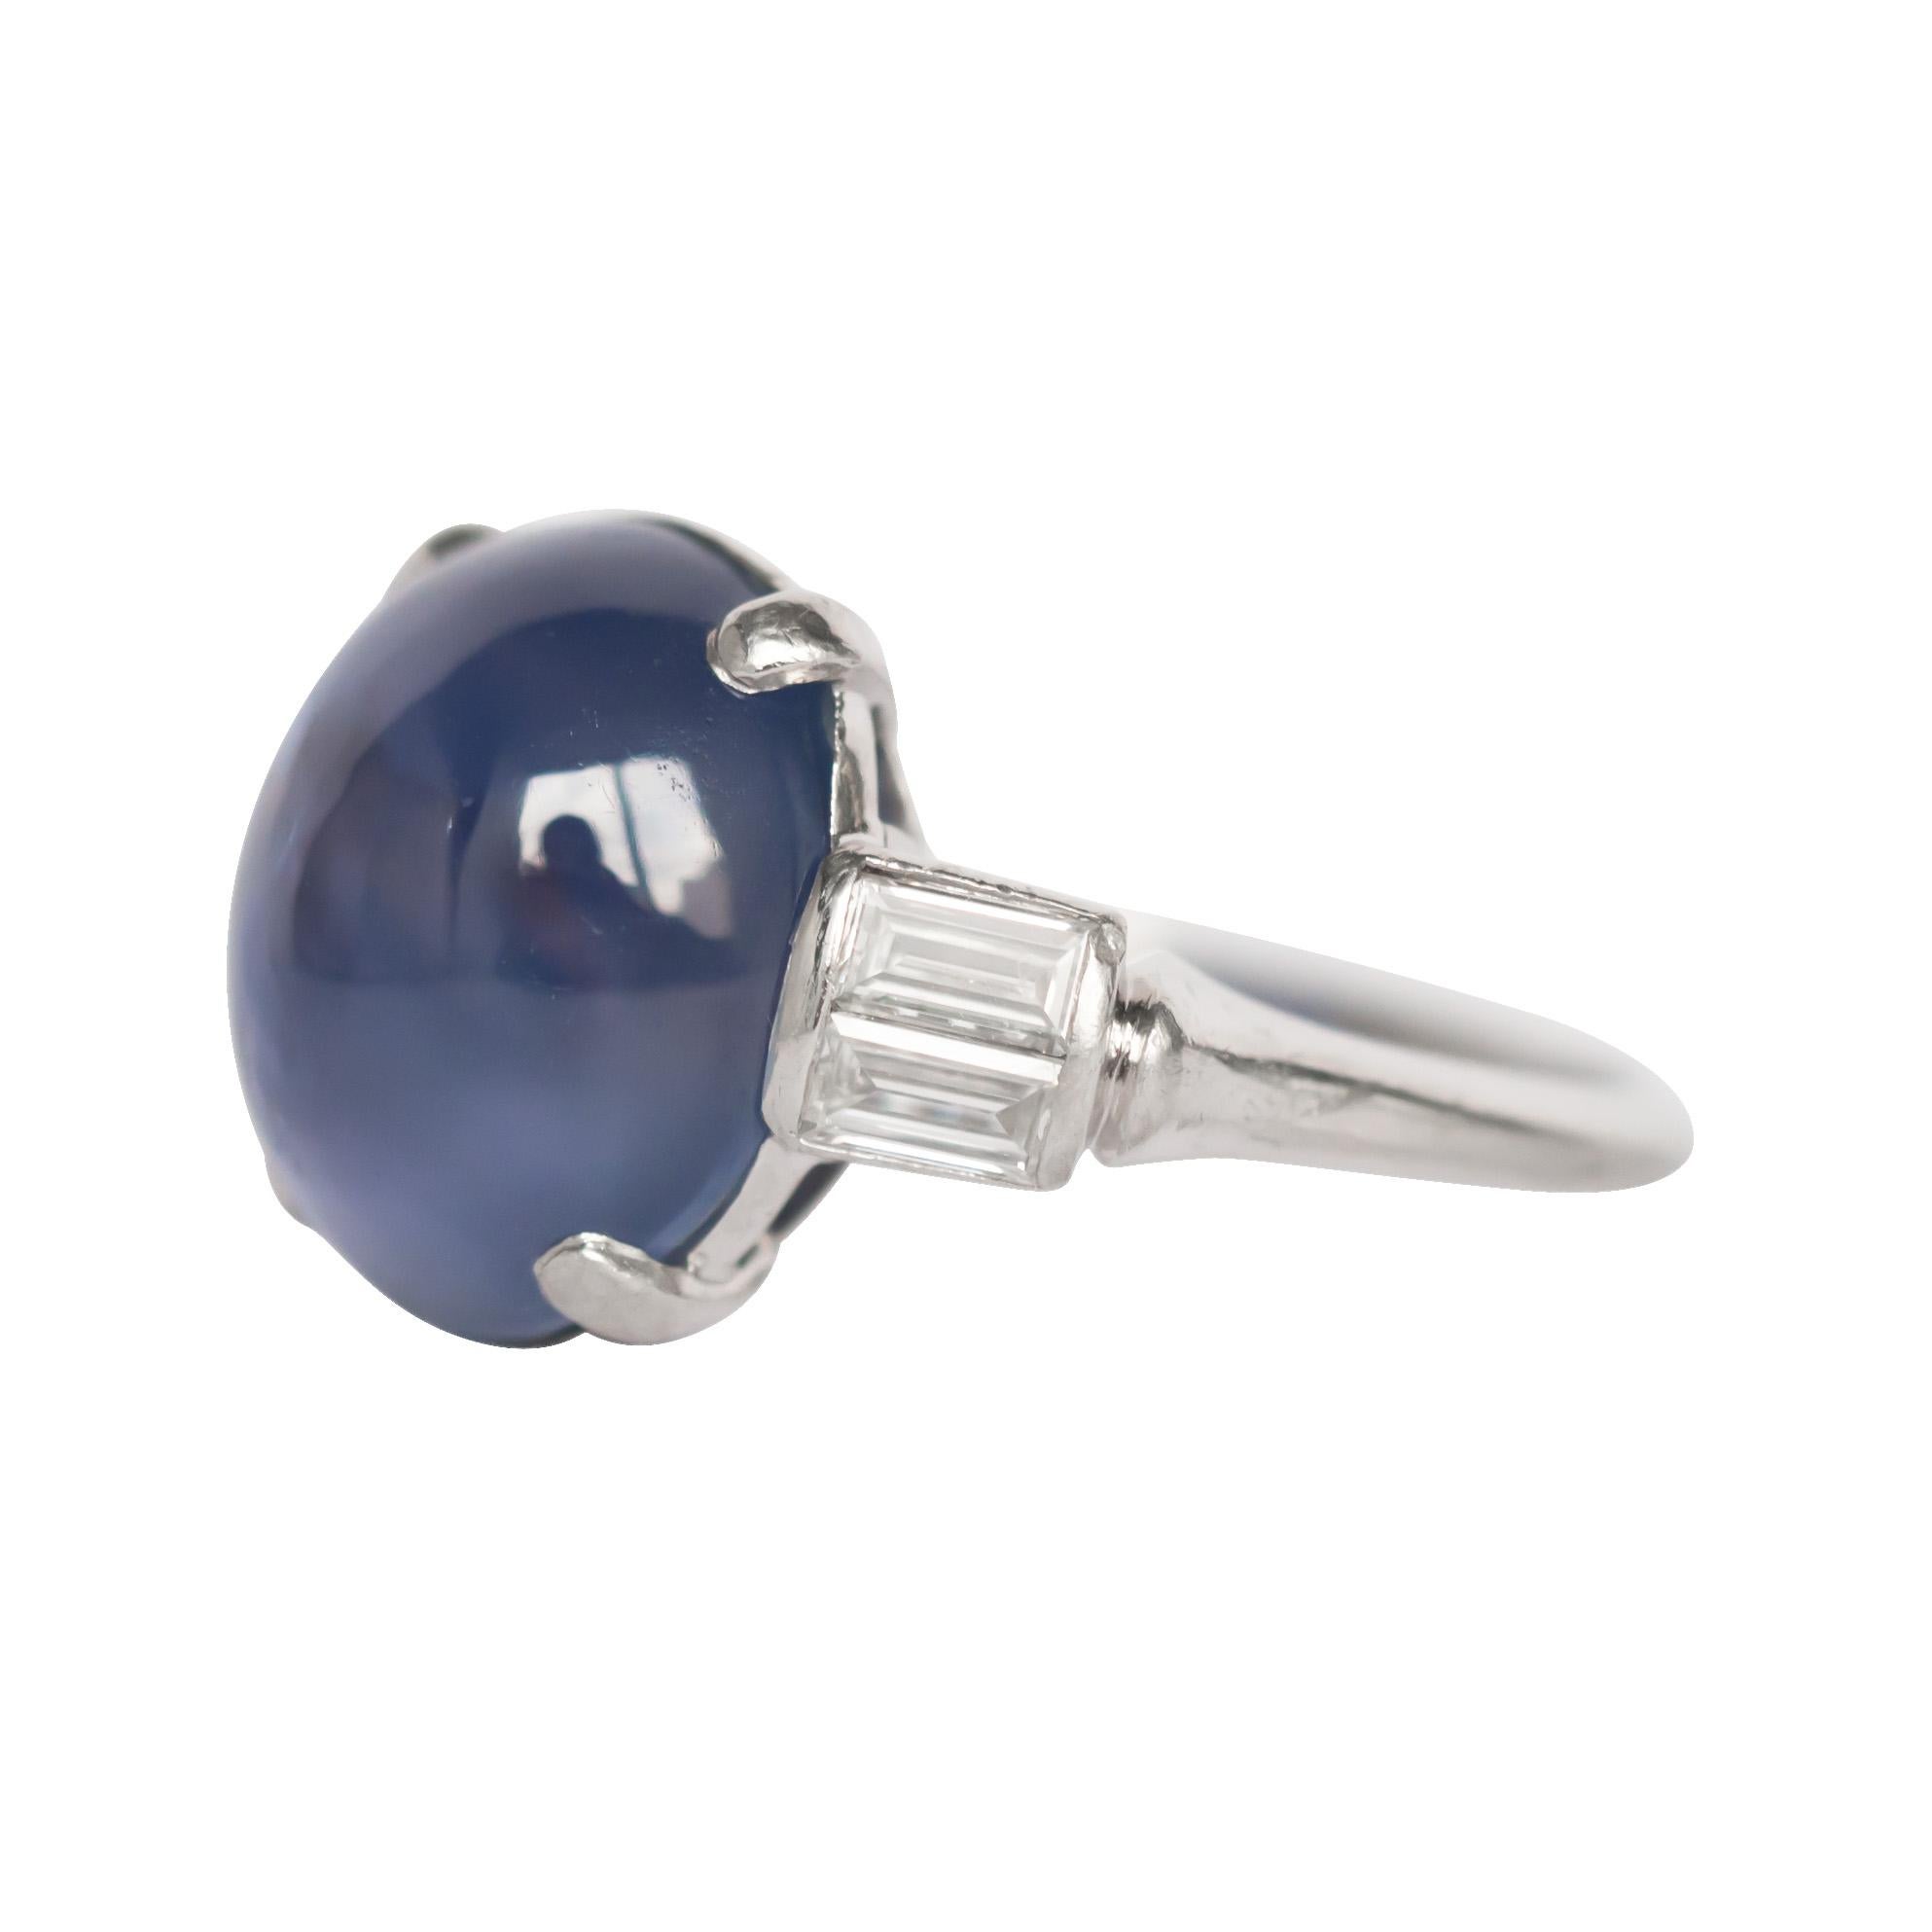 Ring Size: 4.95
Metal Type: Platinum
Weight: 6.3 grams

Color Stone Details: 
Type: Star Sapphire
Shape: Natural Unheated
Carat Weight: 8.00 carat

Side Stone Details: 
Shape: Antique Straight Baguette
Total Carat Weight: .40 carat, total